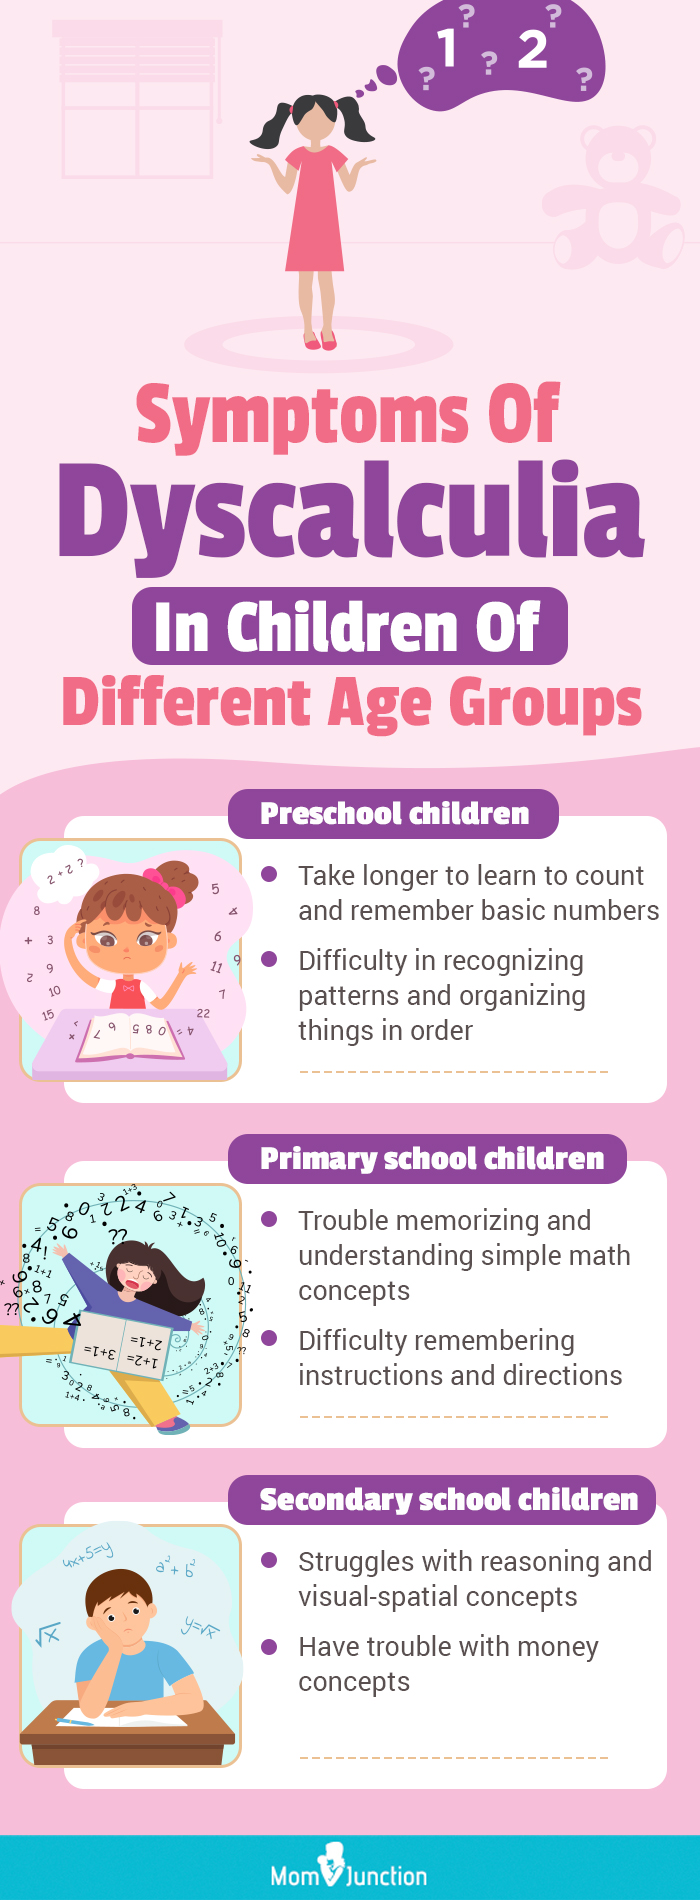 symptoms of dyscalculia in children of different age groups (infographic)